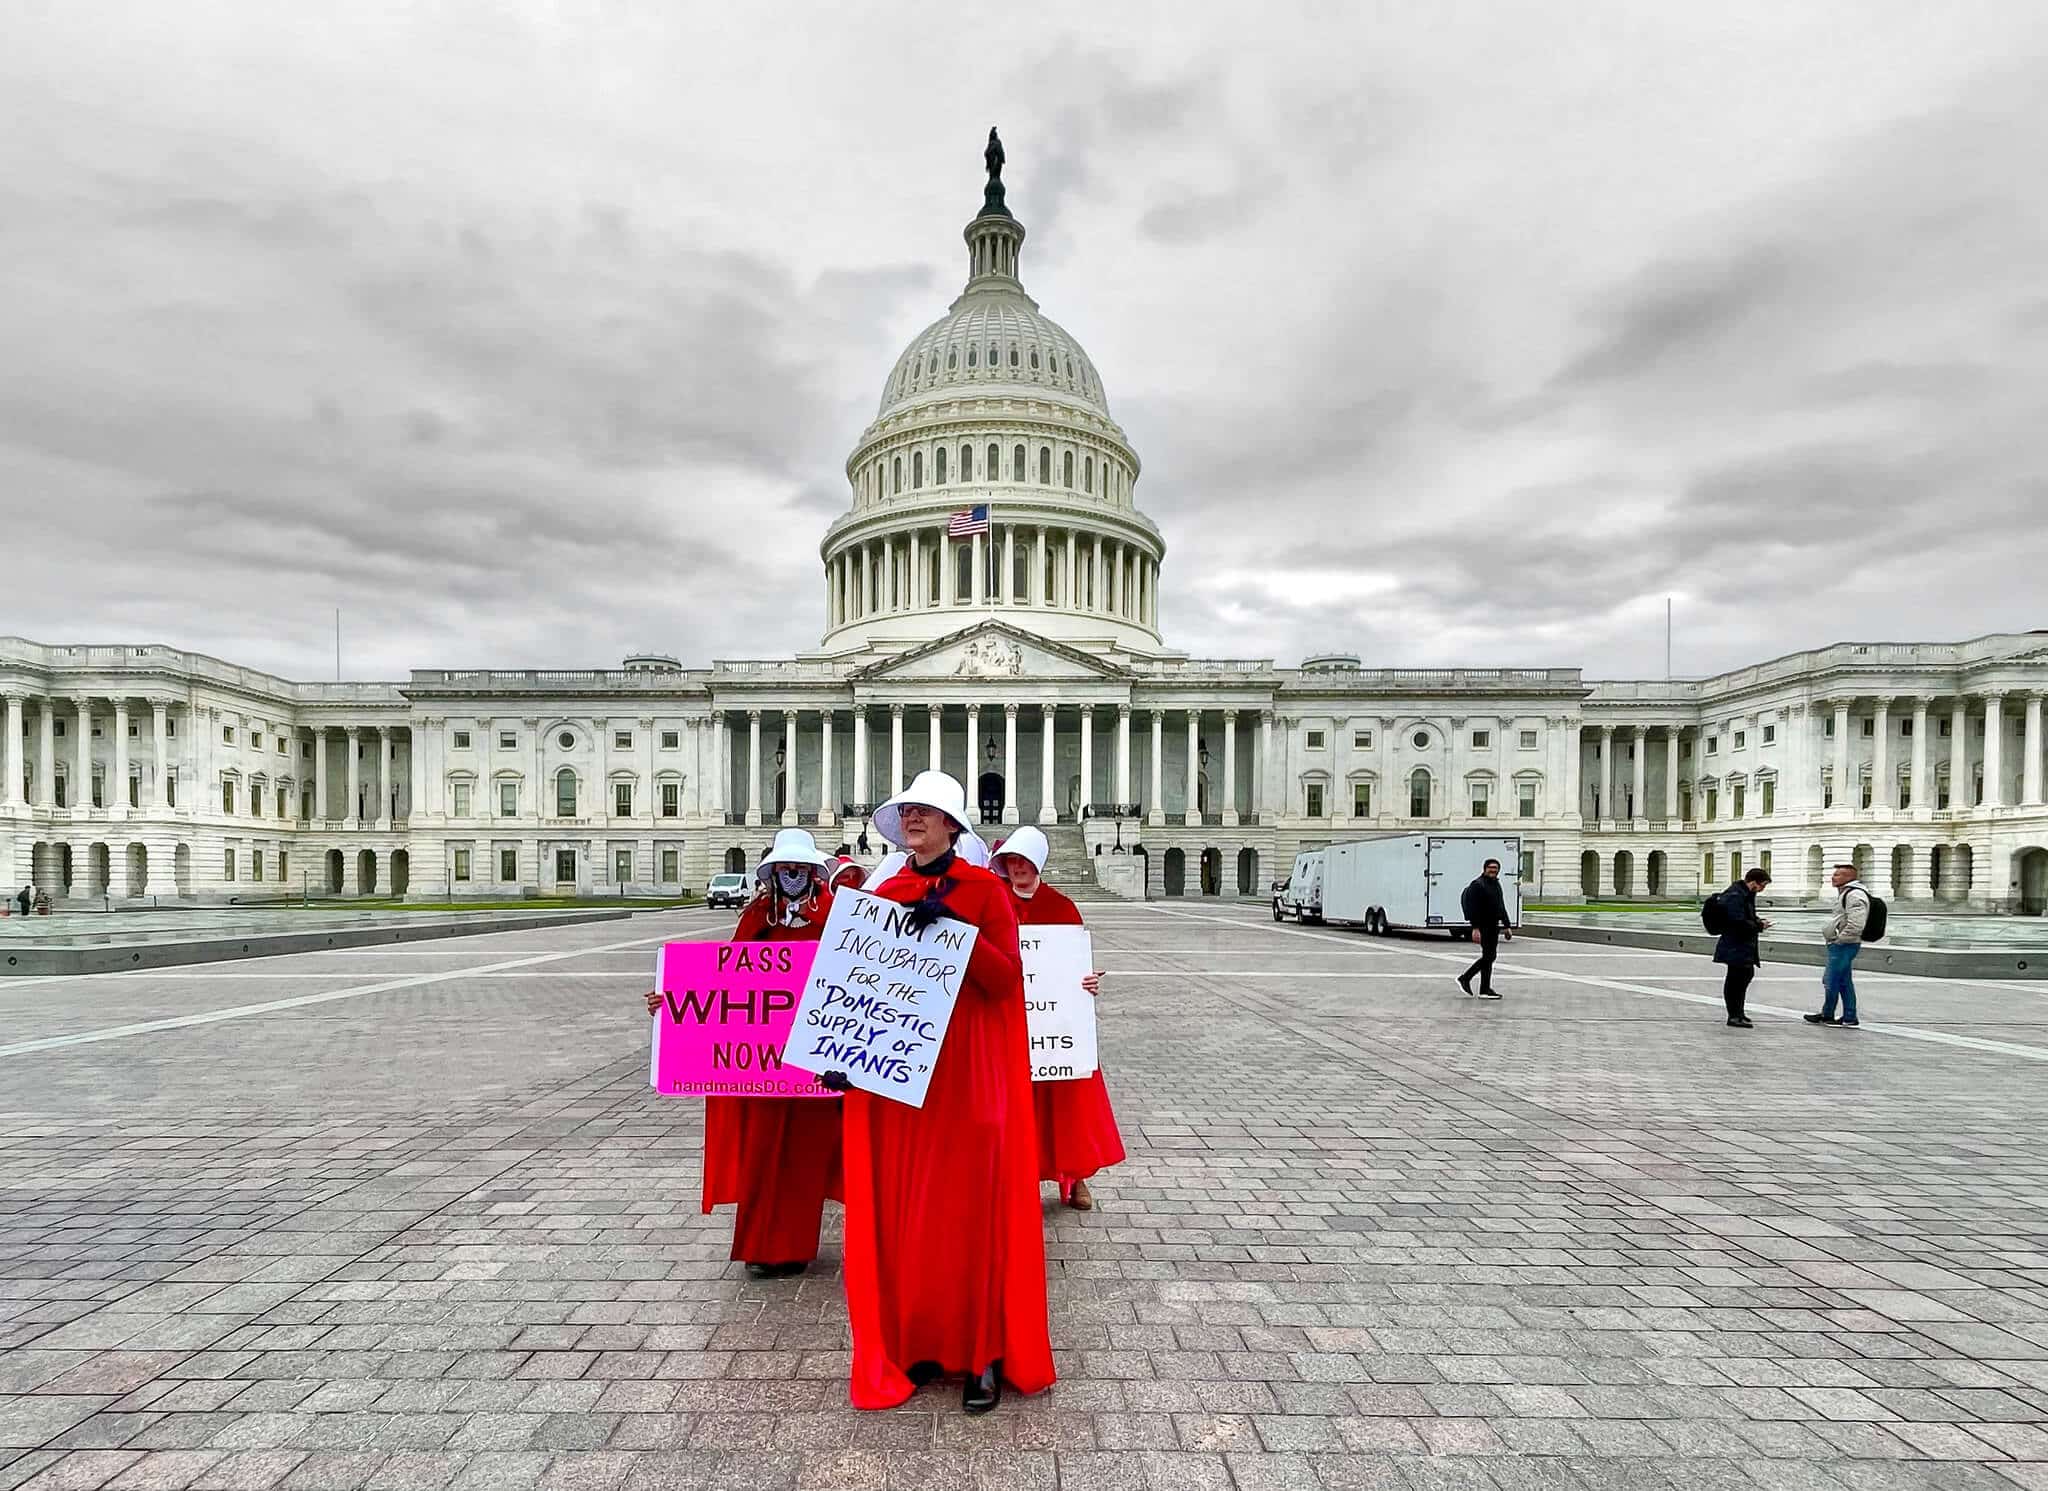 “Handmaids” at the U.S. Capitol protesting in support of abortion rights (Miki Jourdan/Flickr/CC BY-NC-ND 2.0 DEED license)